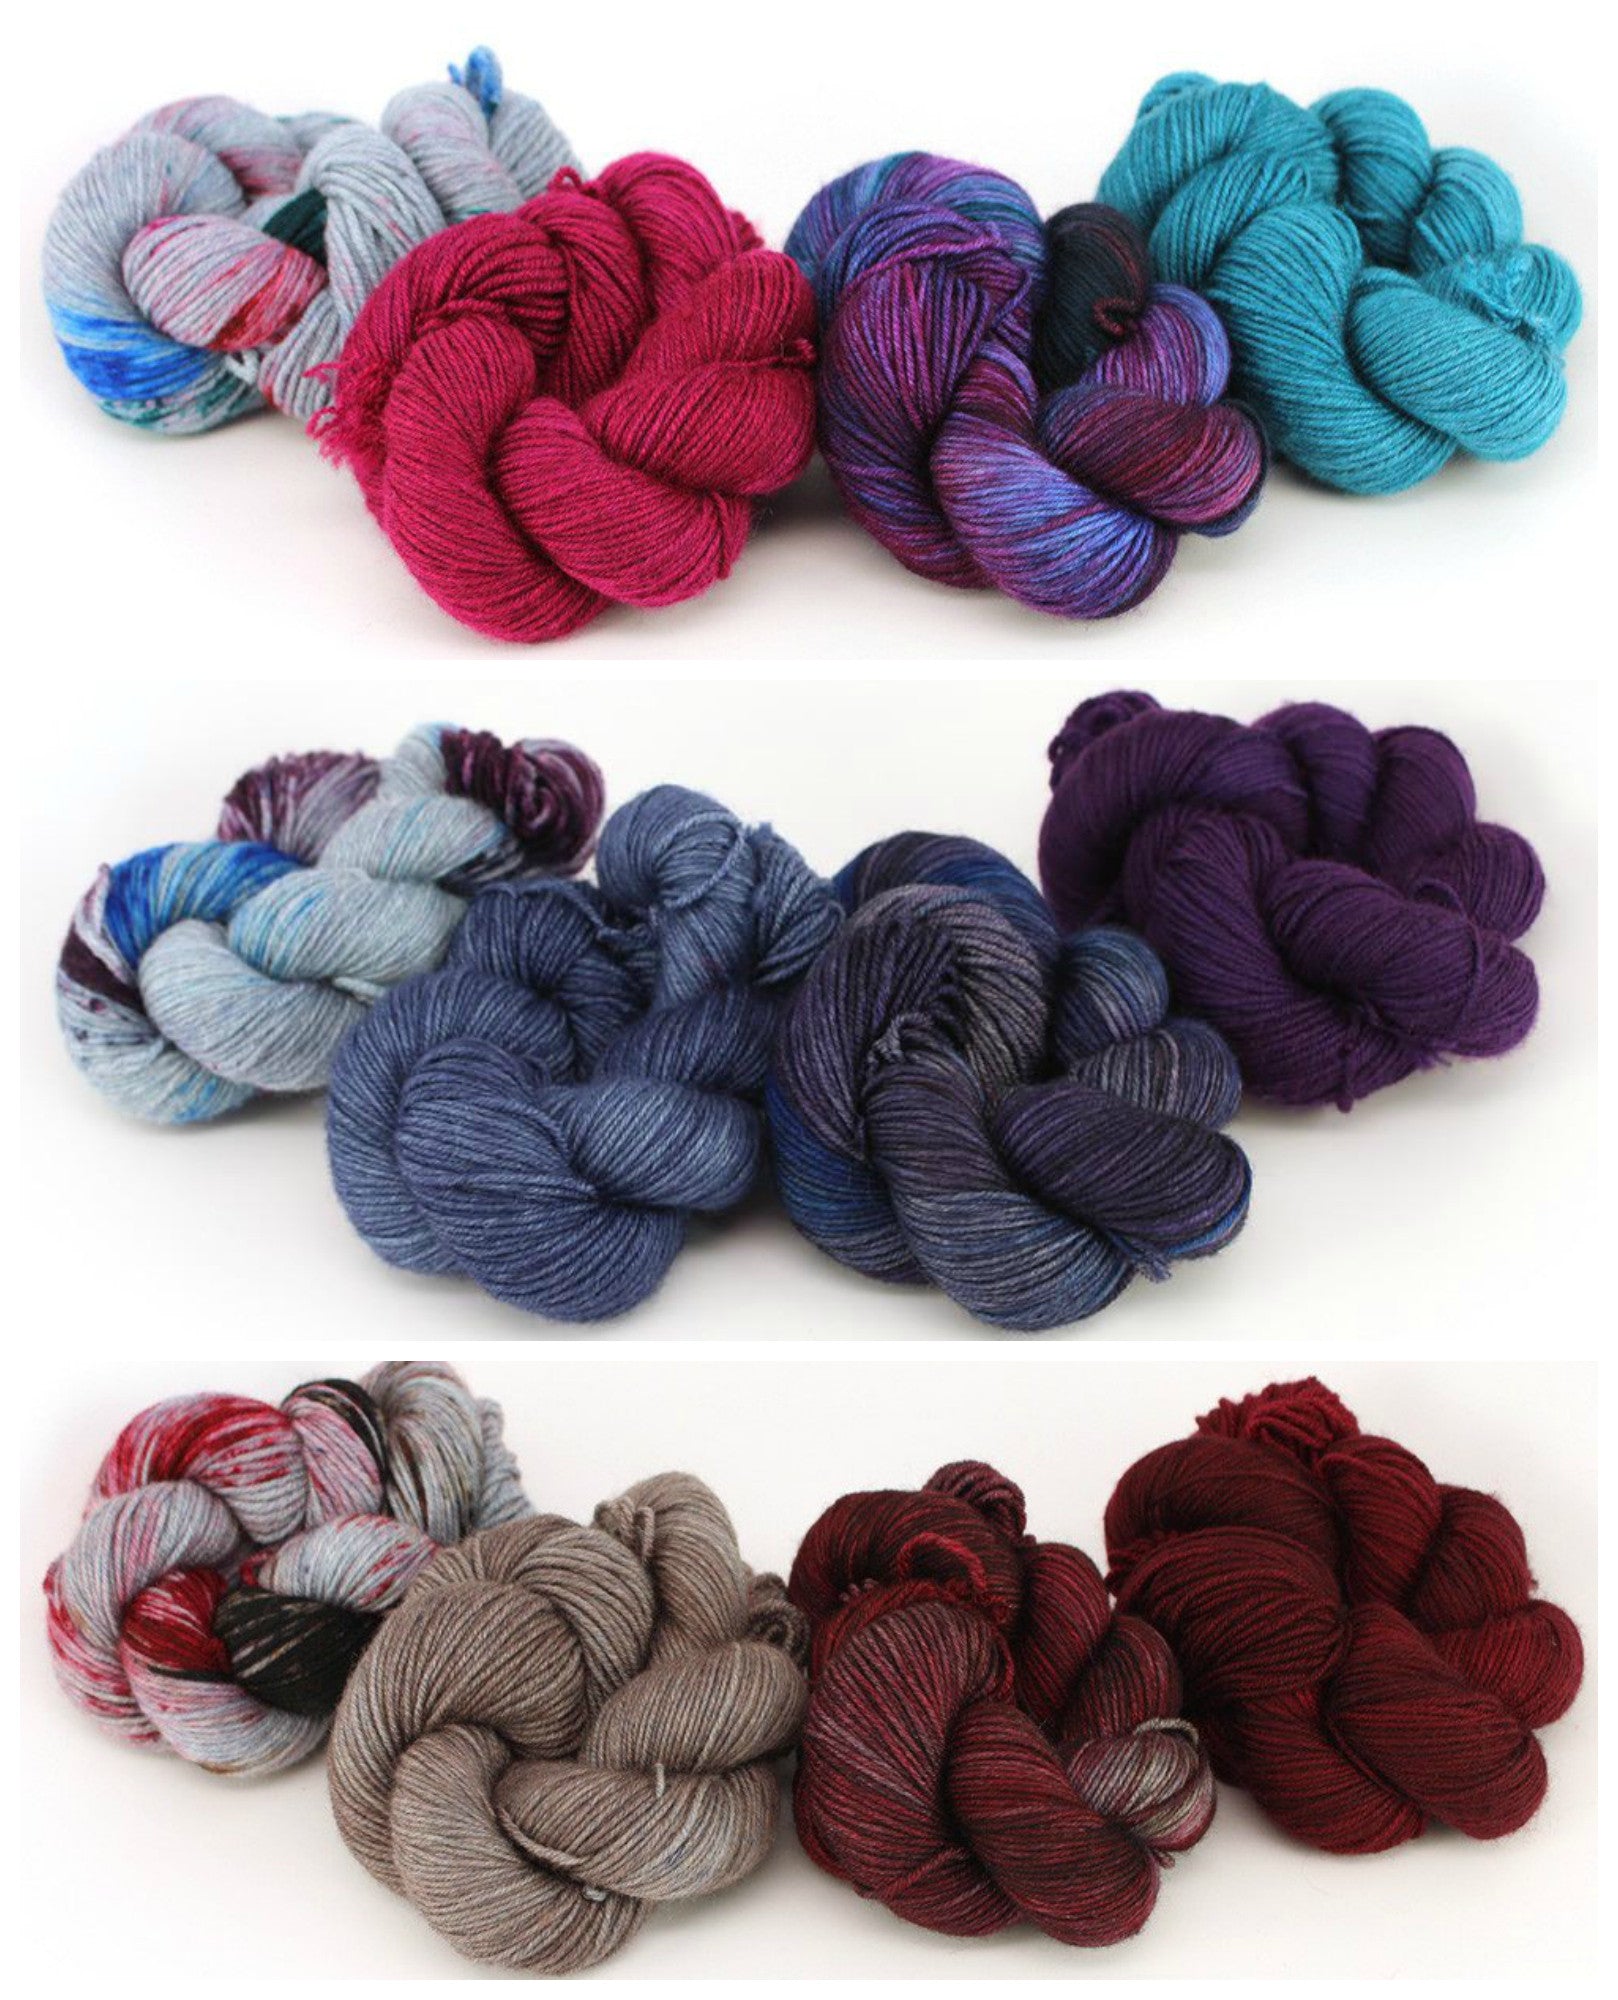 Knitting Patterns for Gradient Sets